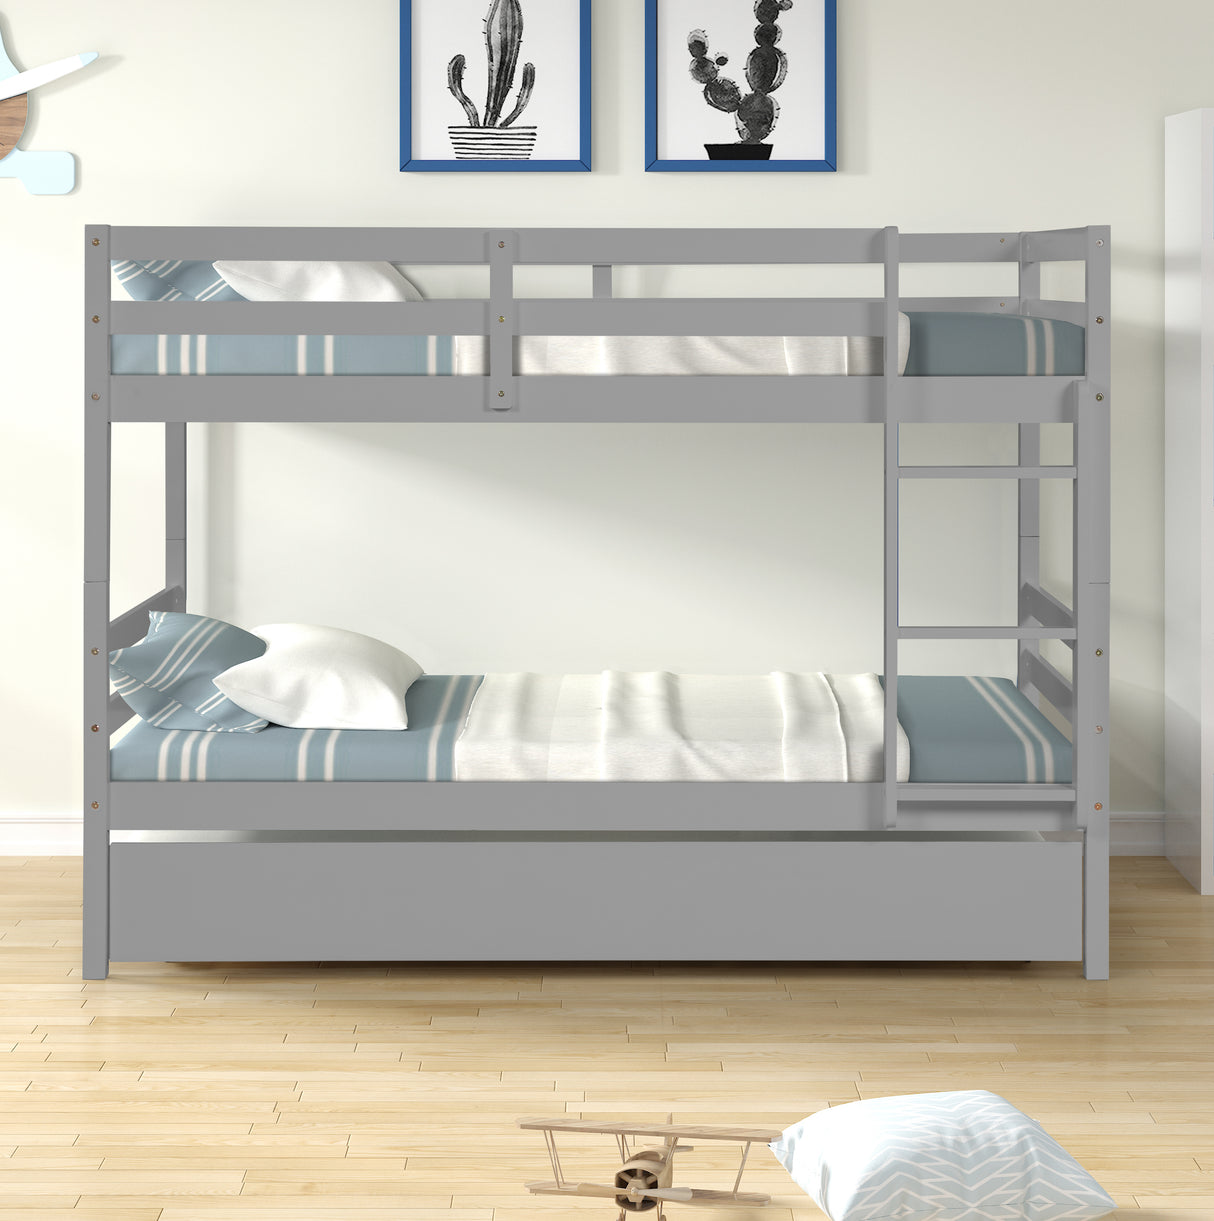 TWIN BUNKBED WITH TRUNDLE - Home Elegance USA